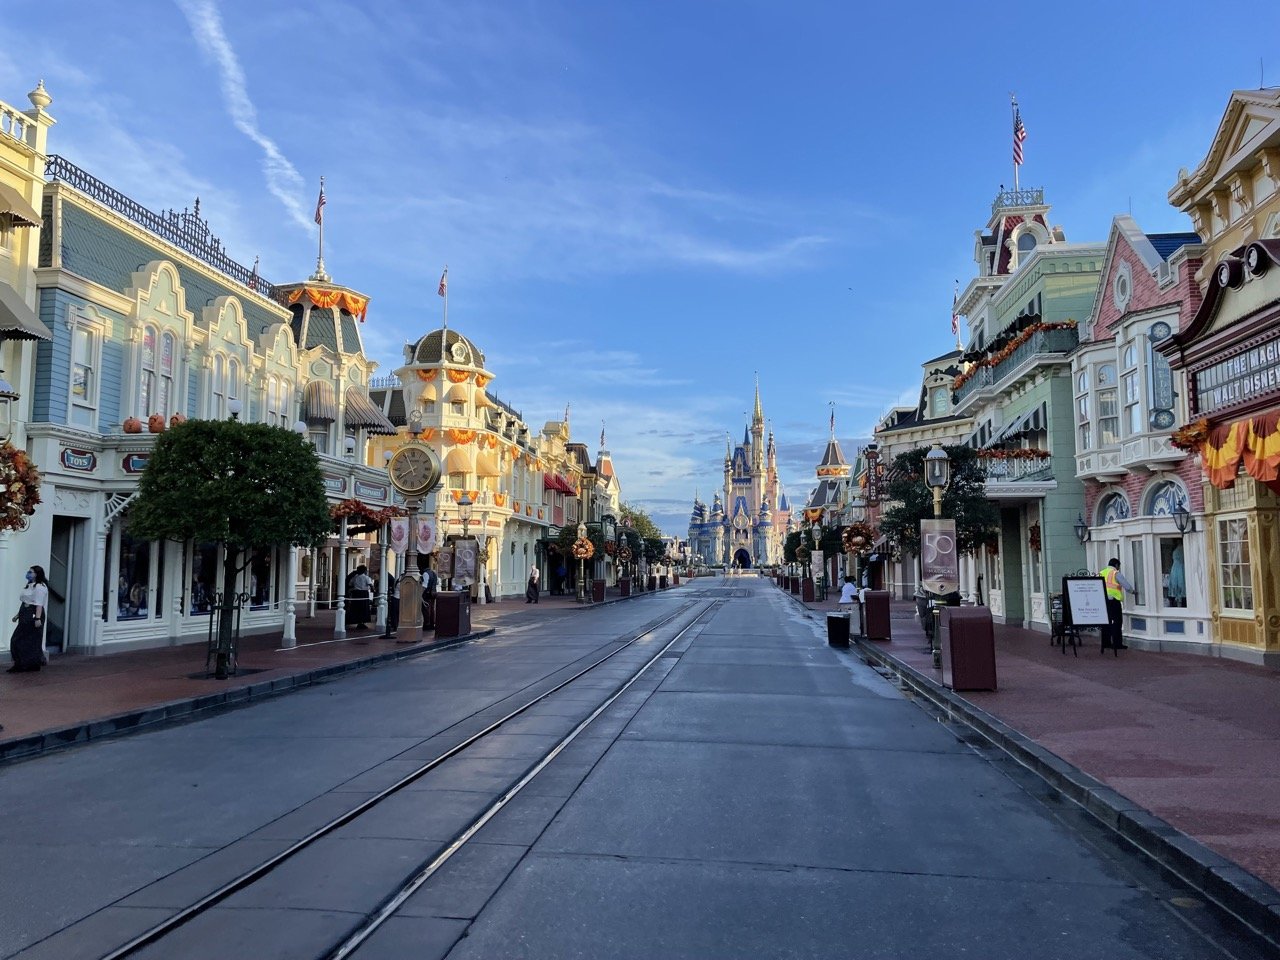 https://www.mousehacking.com/blog/disney-world-50th-anniversary-trip-report-part-7-magic-kingdom-and-hollywood-studios